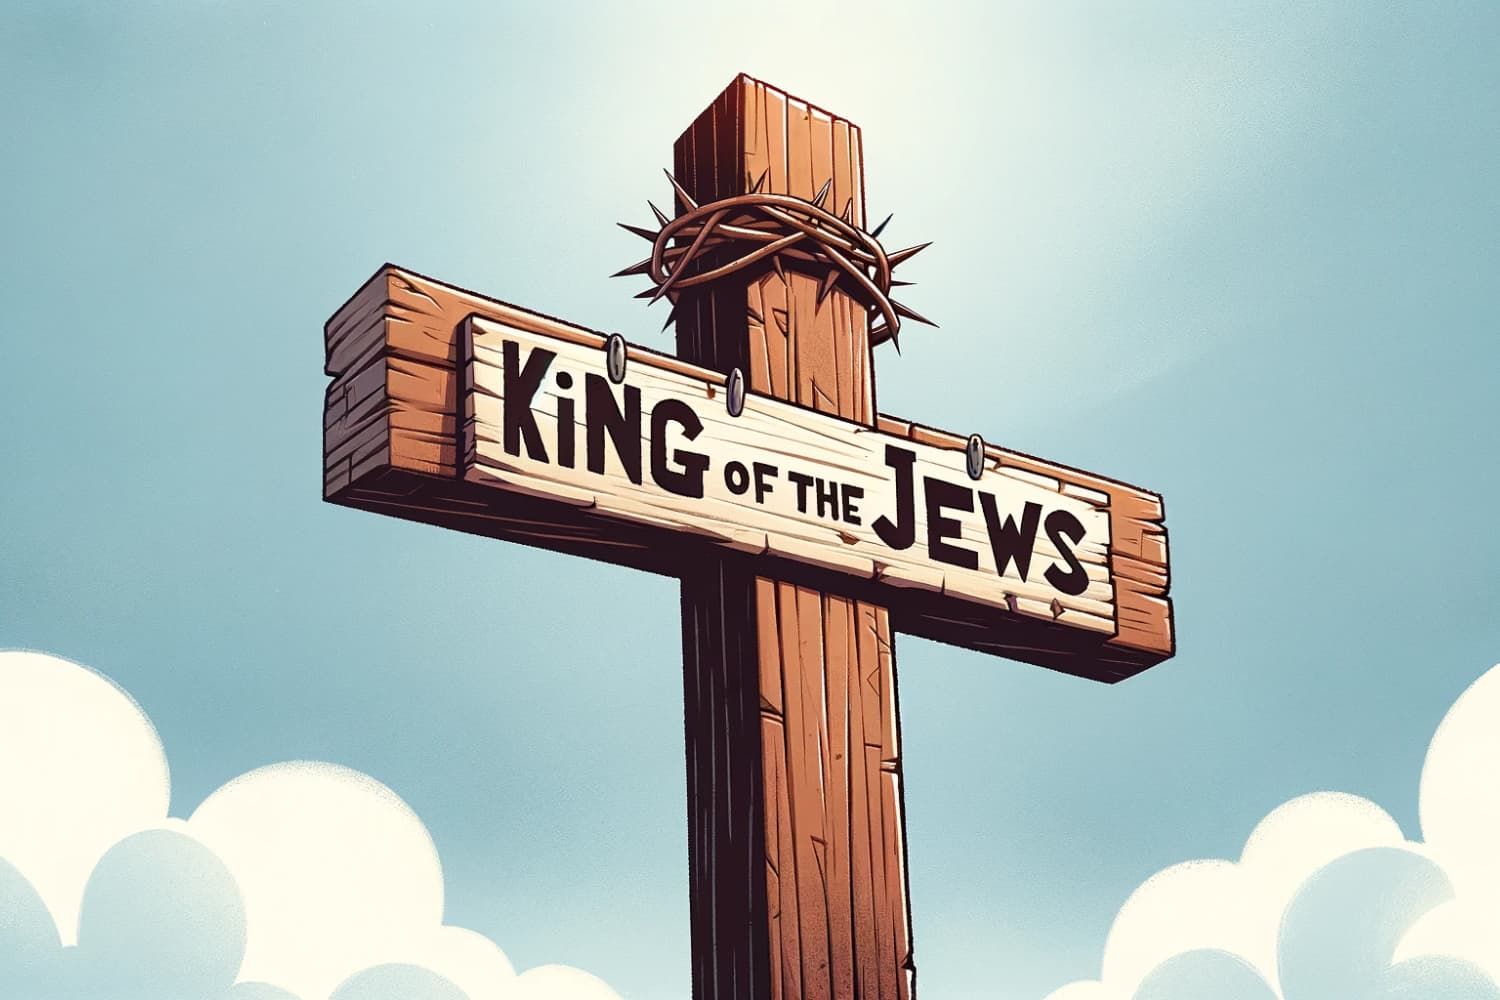 Lesson%20-%20NT%20Easter%2006%20-%20Jesus%20king%20of%20the%20Jews-1a7fec3c Jesus' trial - before Herod